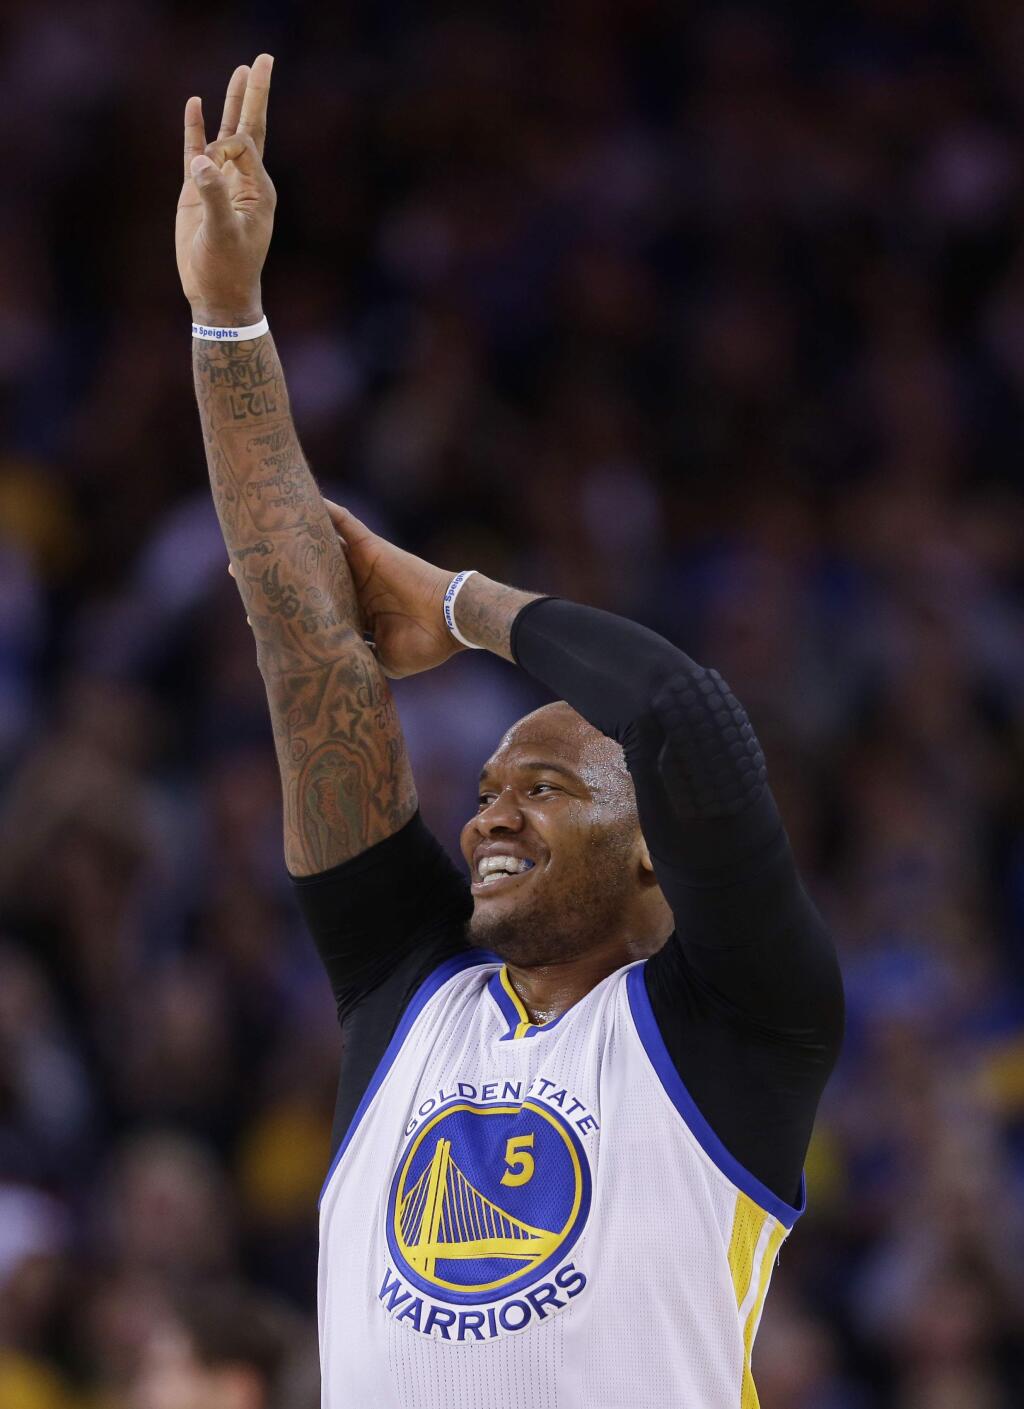 Golden State Warriors' Marreese Speights (5) celebrates after making a 3-point basket during the first half of a game against the New Orleans Pelicans Friday, March 20, 2015, in Oakland. (AP Photo/Marcio Jose Sanchez)